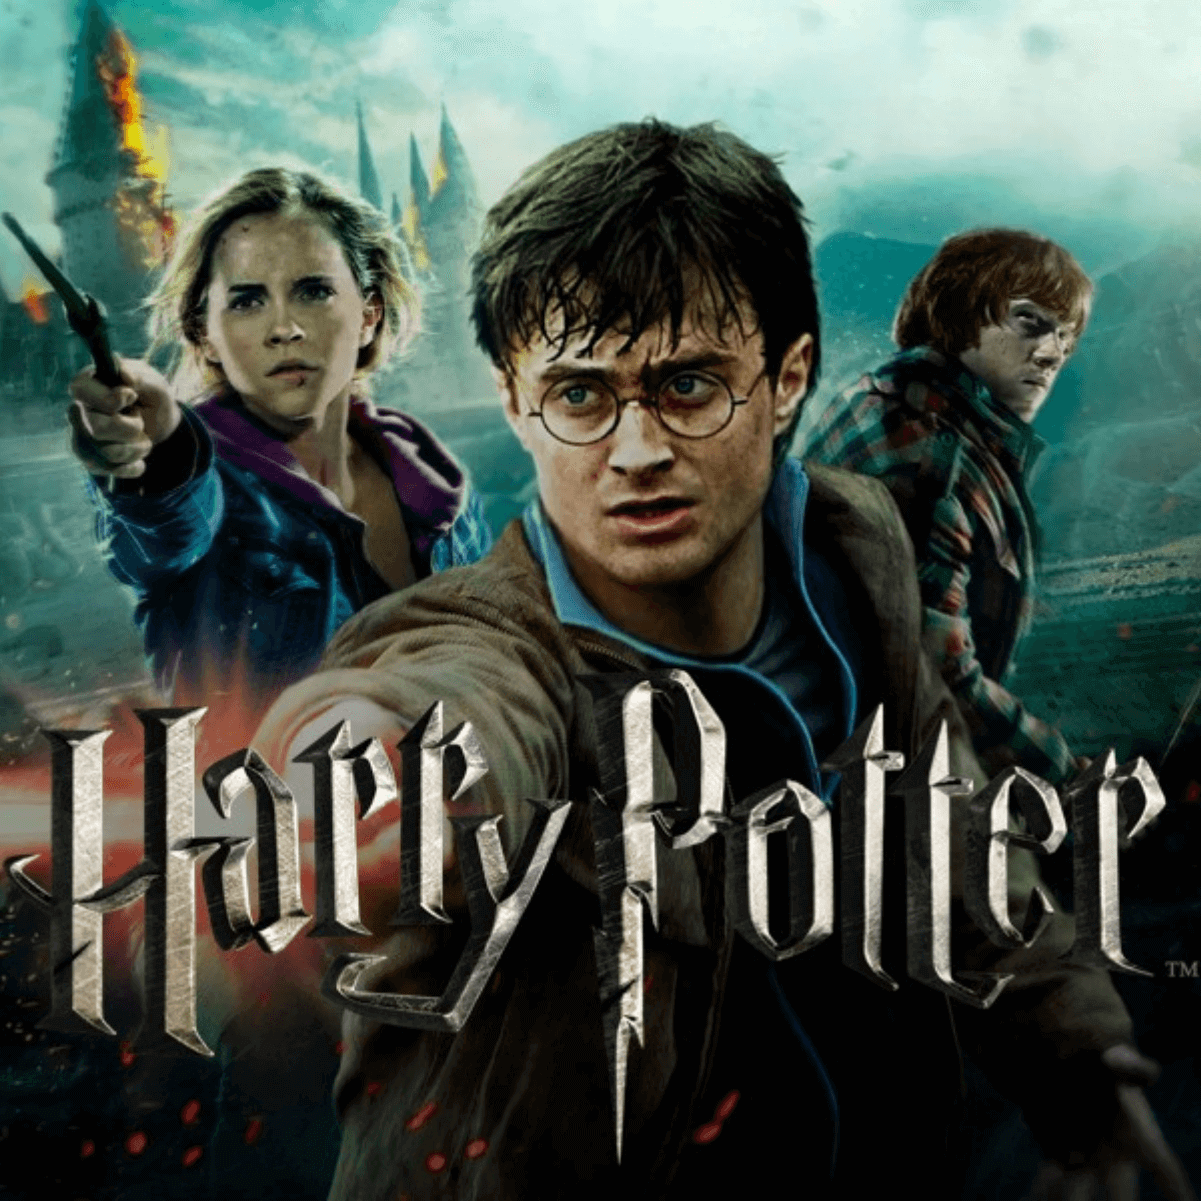 where can you watch harry potter movies